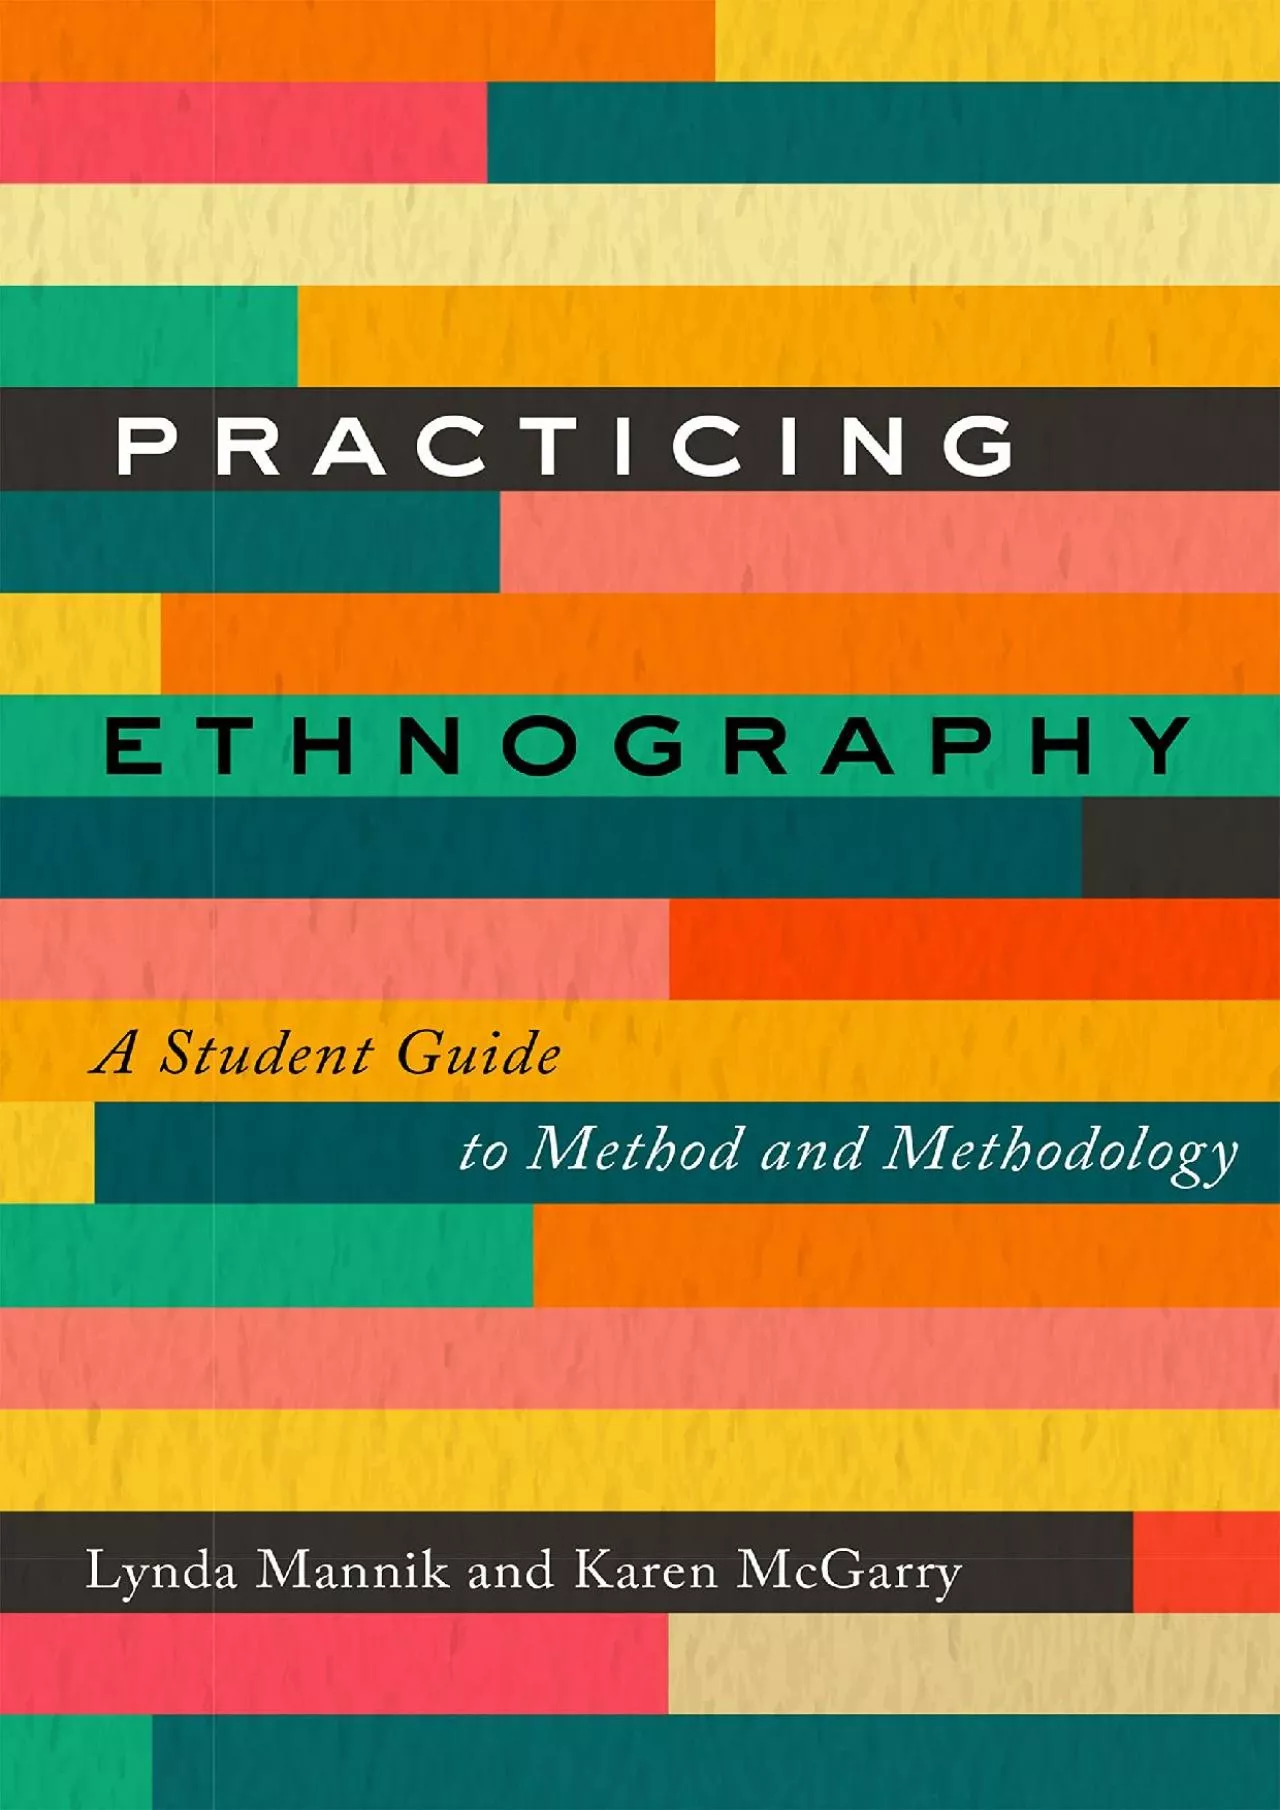 (BOOK)-Practicing Ethnography: A Student Guide to Method and Methodology